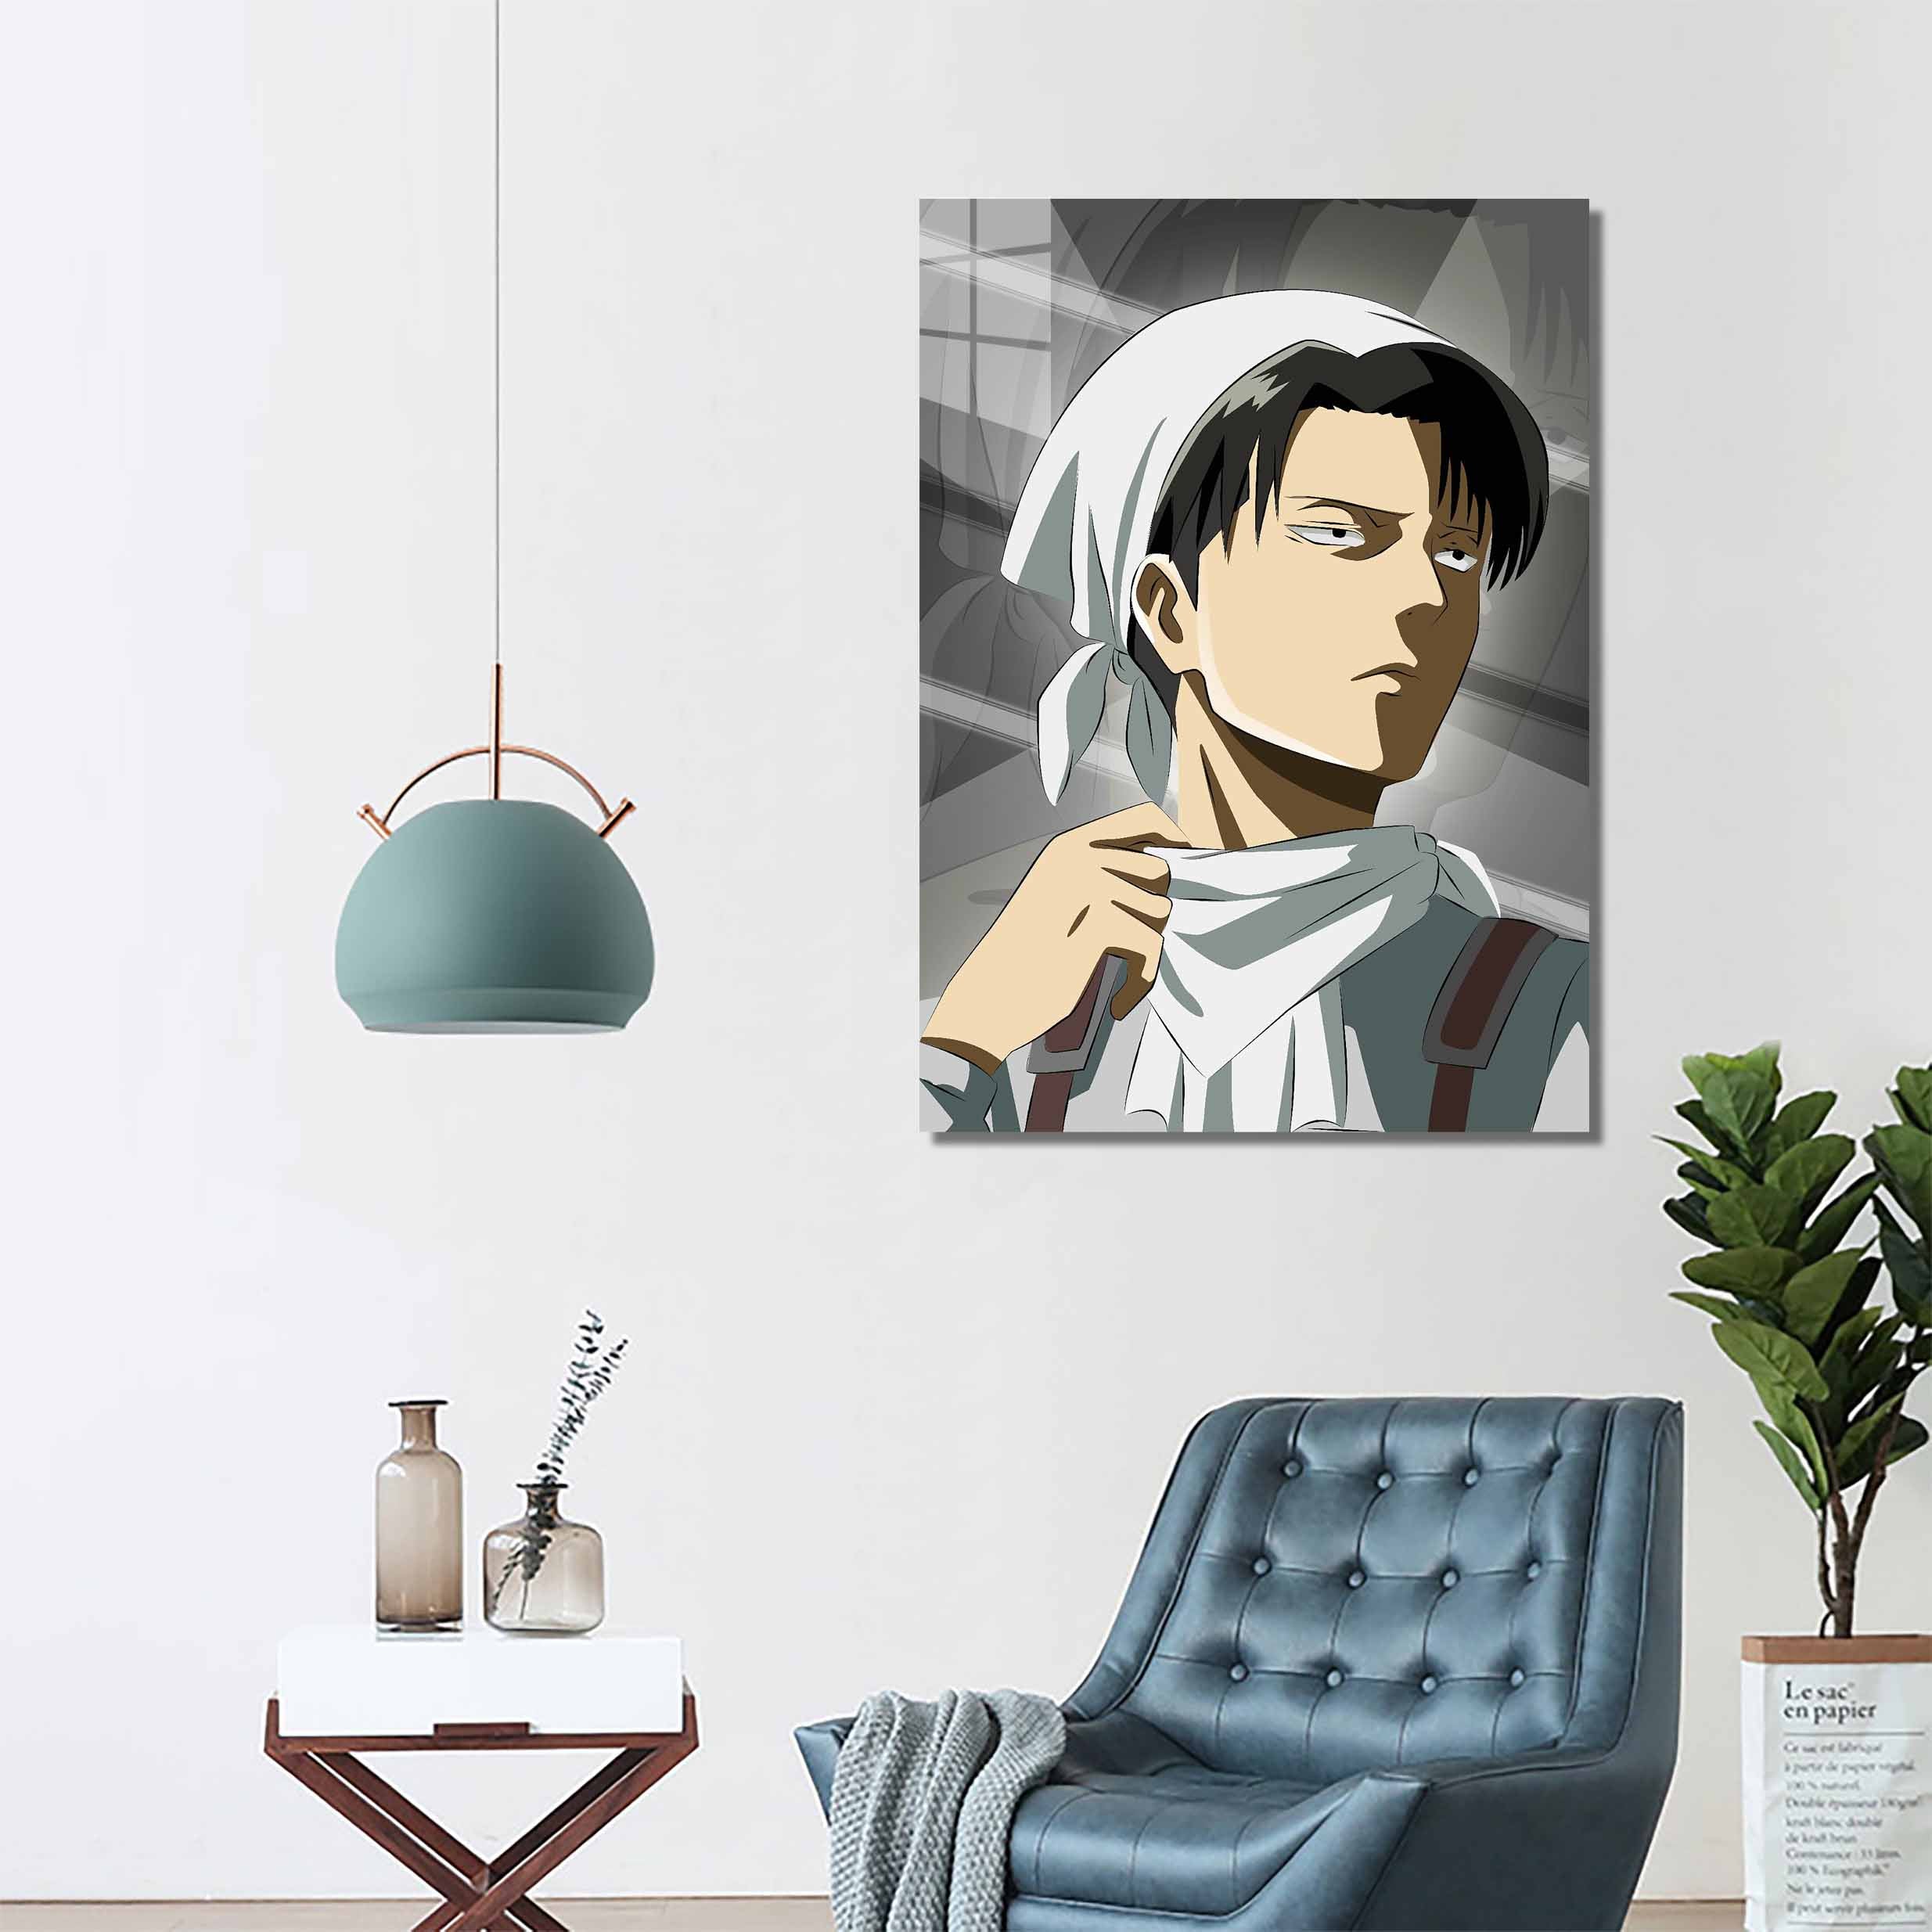 Levi Ackerman AOT-designed by @Inspire Collection